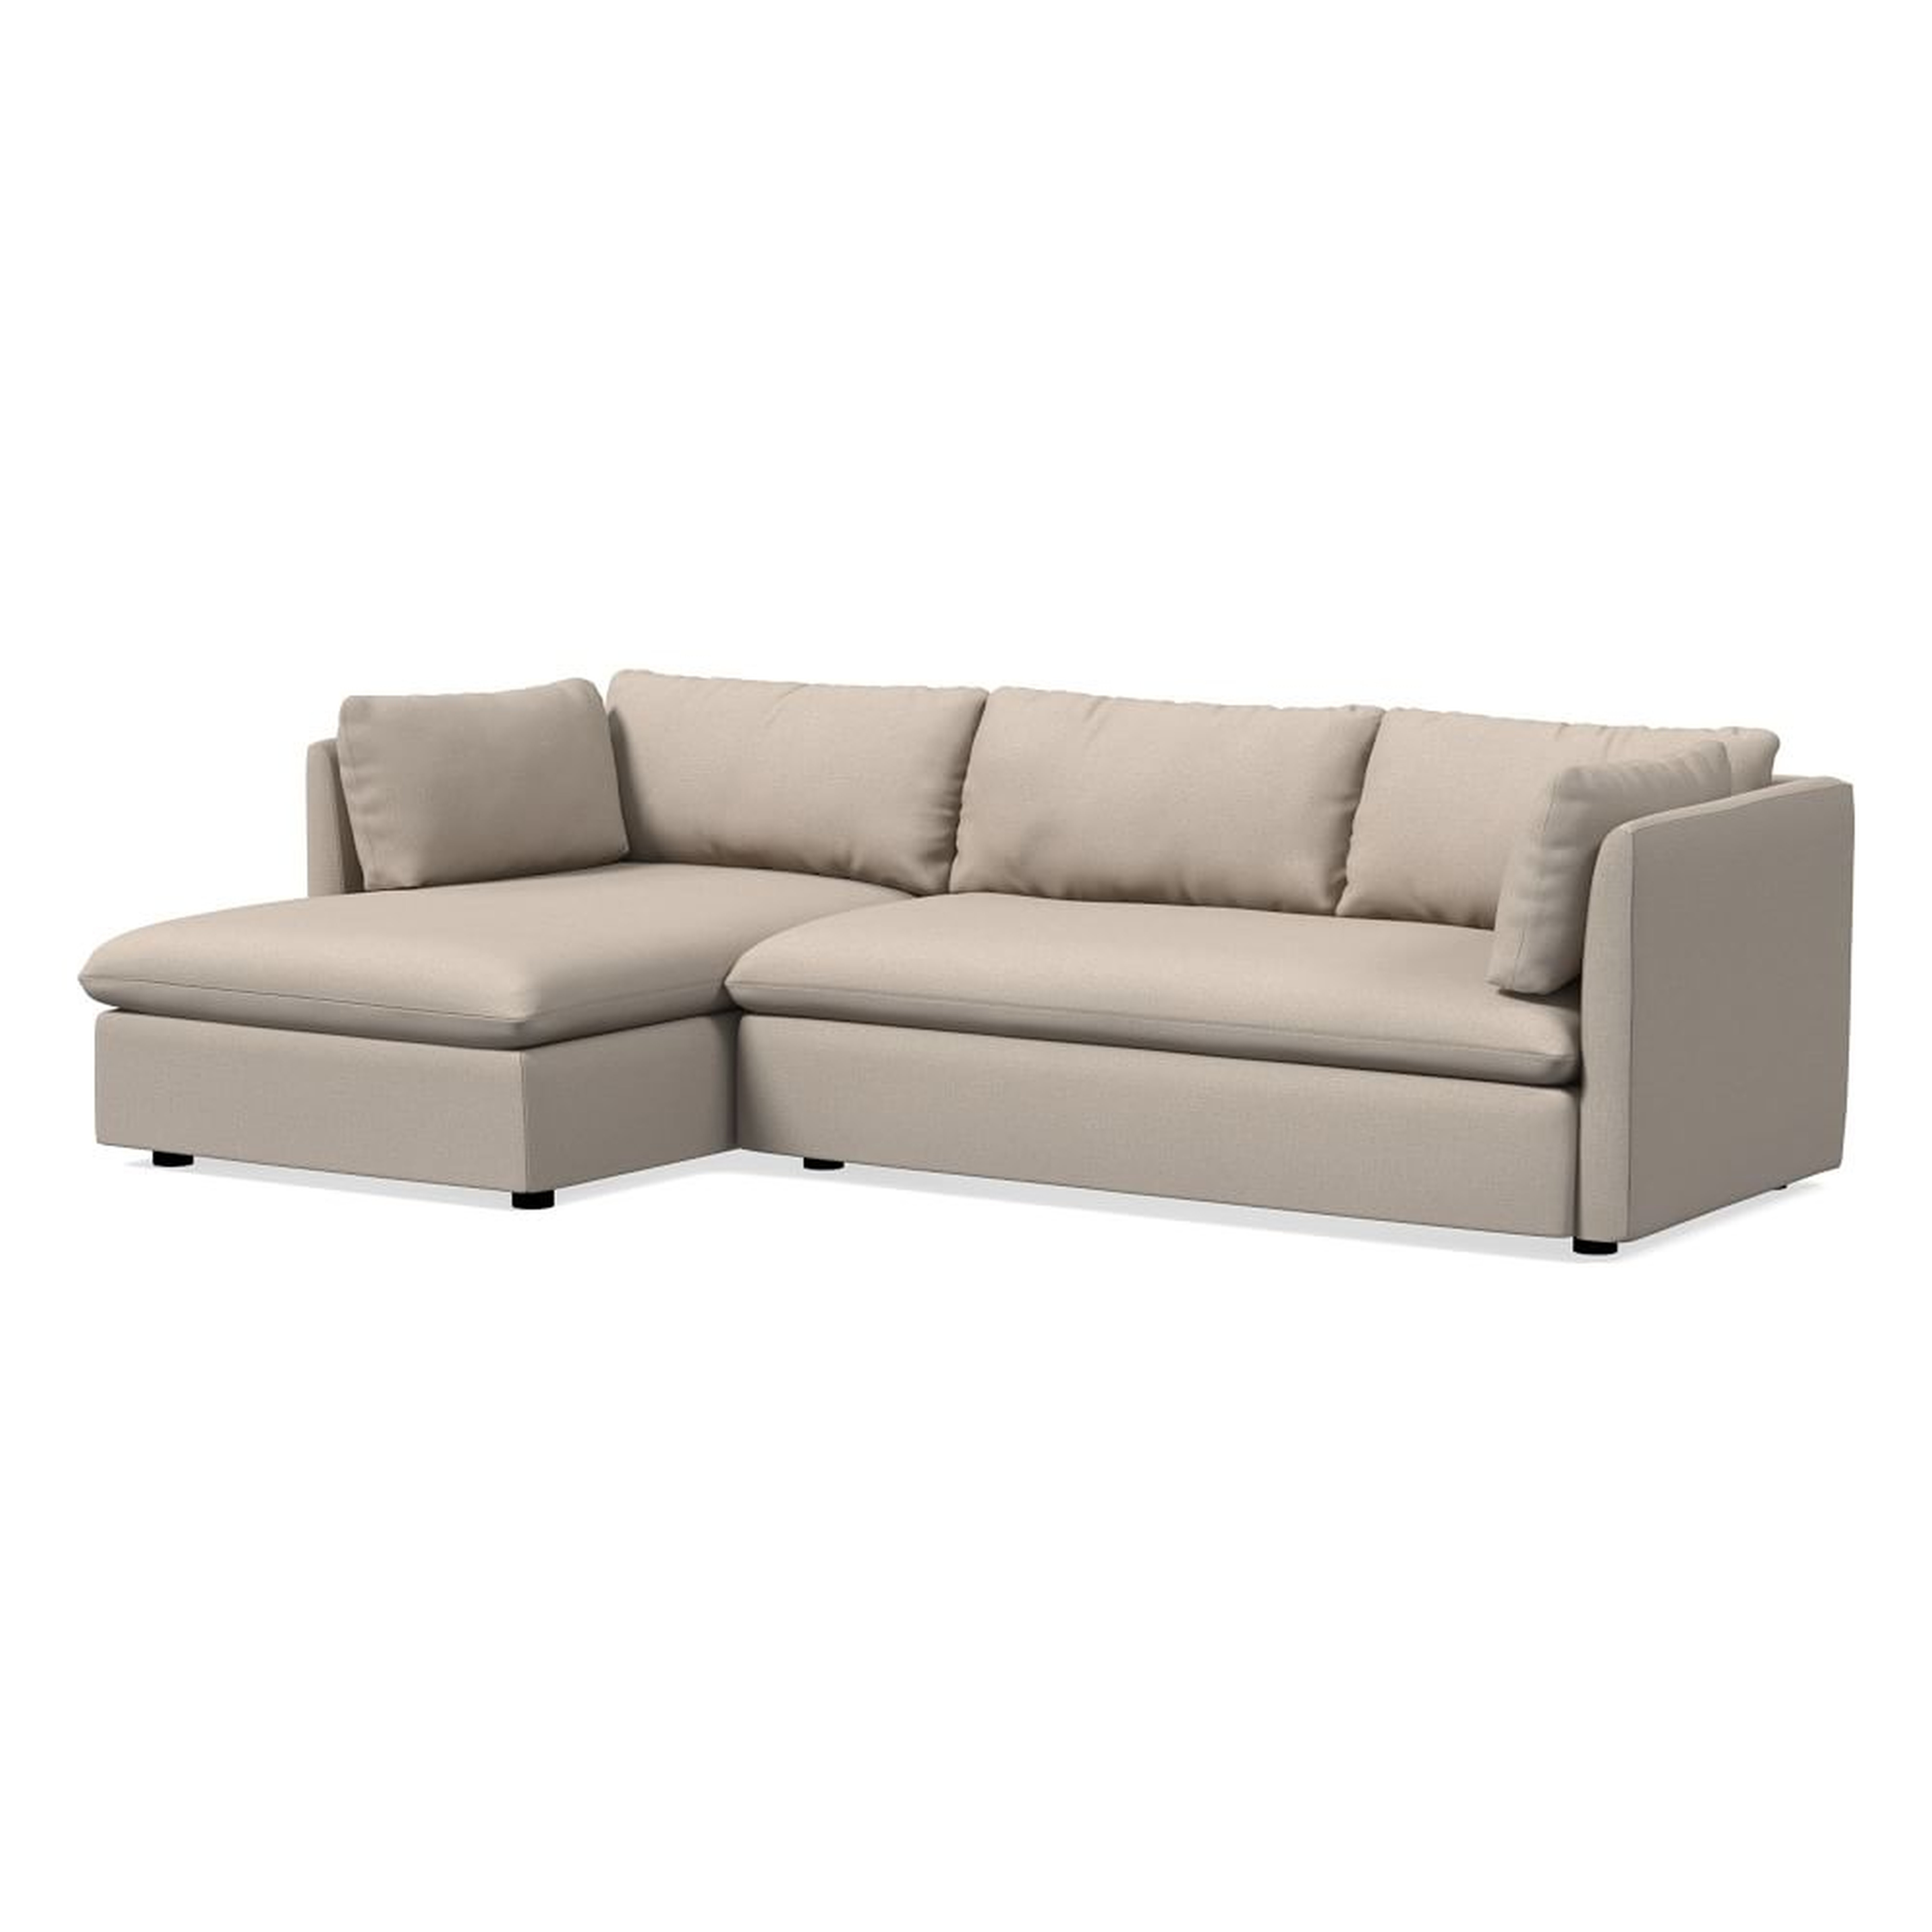 Shelter 105" Left 2-Piece Chaise Sectional, Yarn Dyed Linen Weave, Sand - West Elm